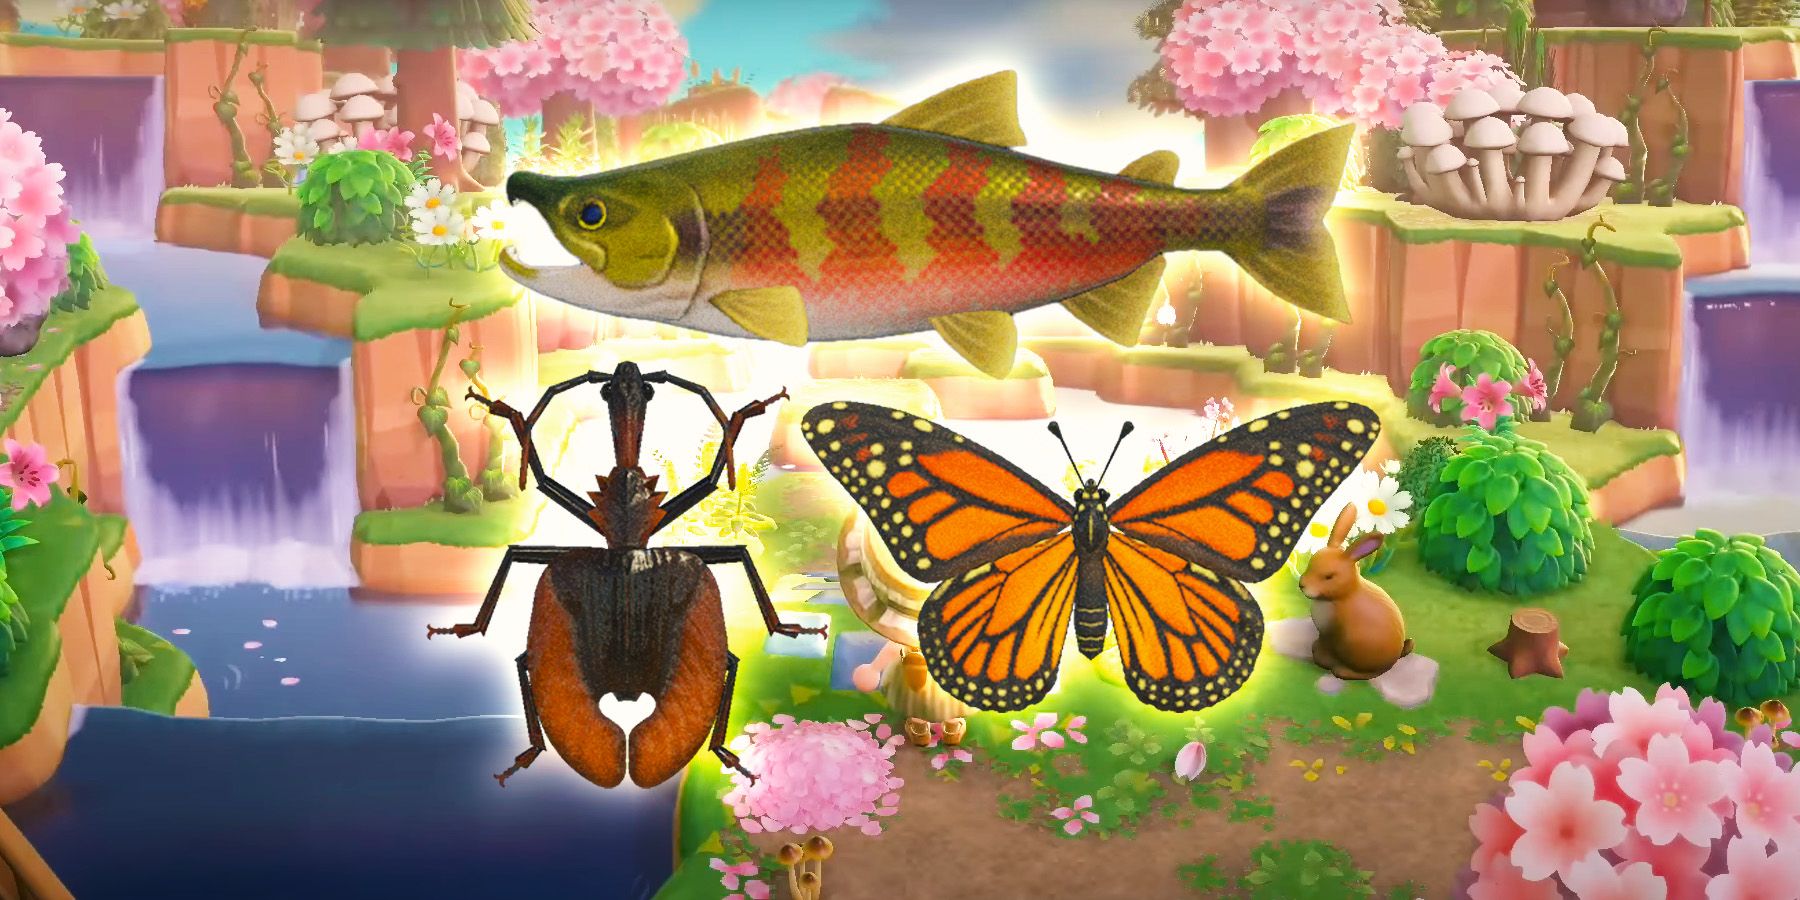 A Fish, Butterfly and a Beetle from Animal Crossing New Horizons